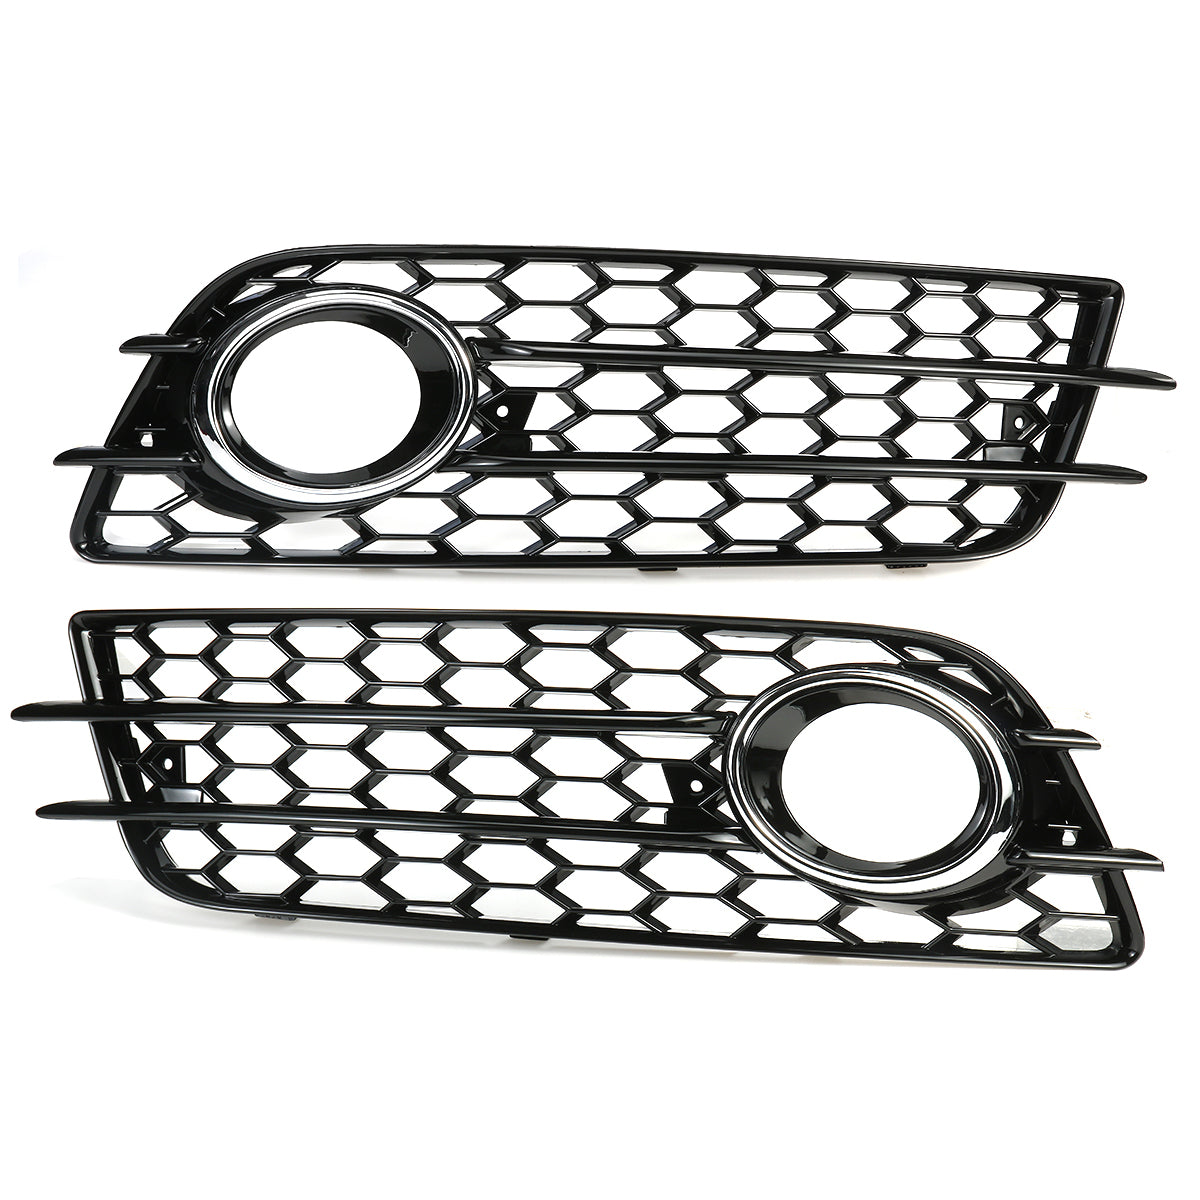 White Smoke Plating Front Fog Light Cover Honeycomb Hex Grille Grill For Audi A4 B8 S-Line S4 2008-2012